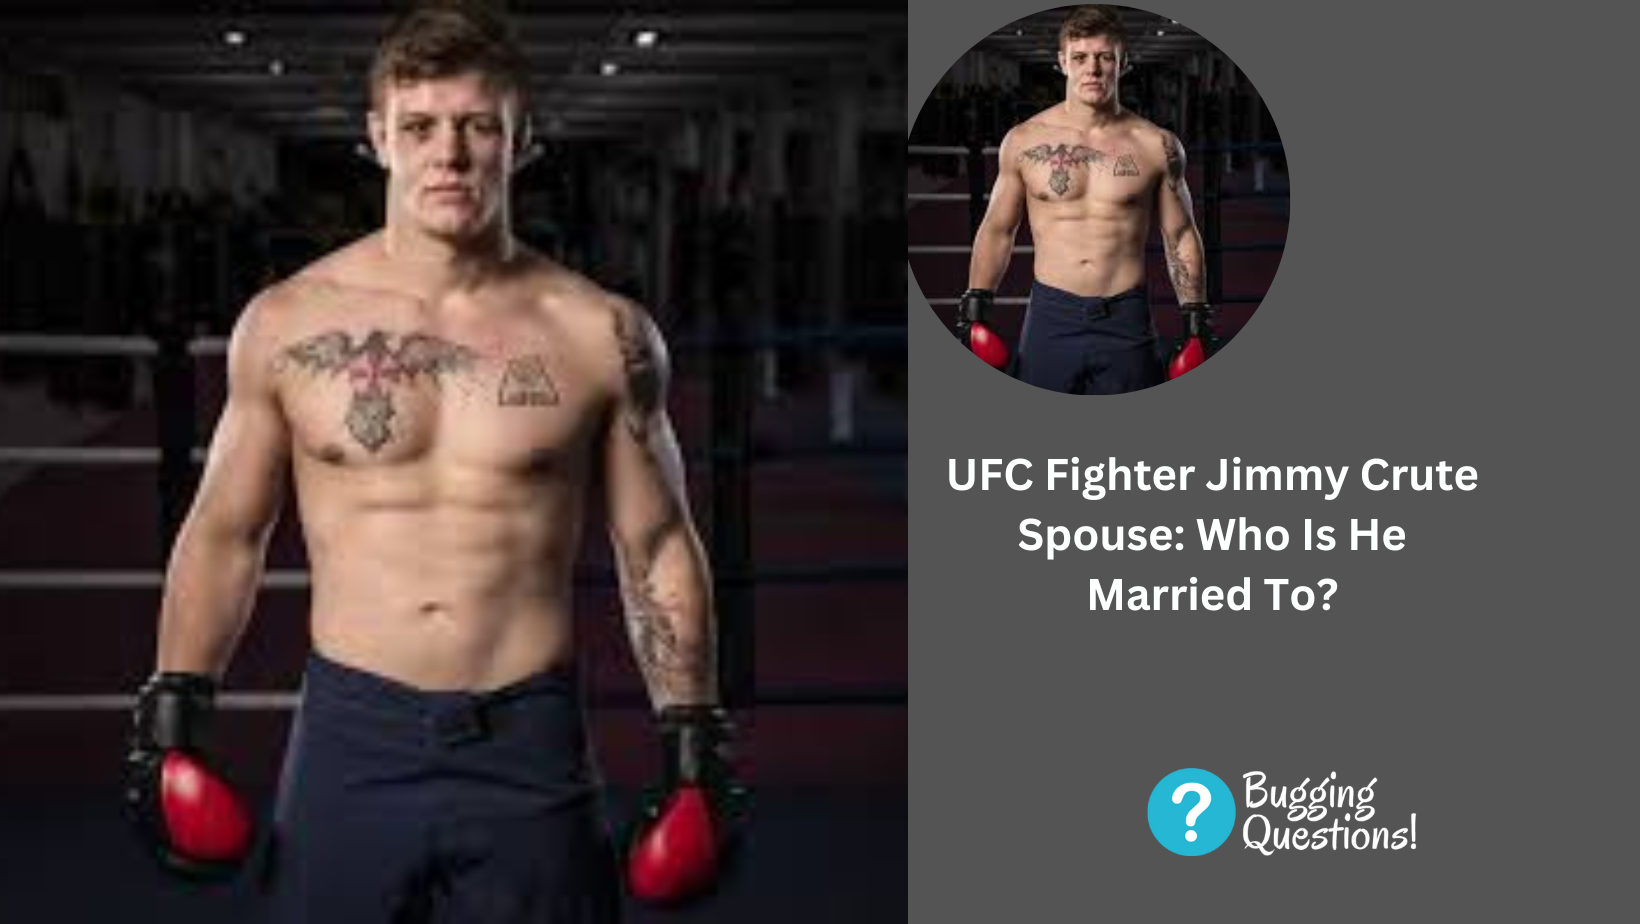 UFC Fighter Jimmy Crute Spouse: Who Is He Married To?